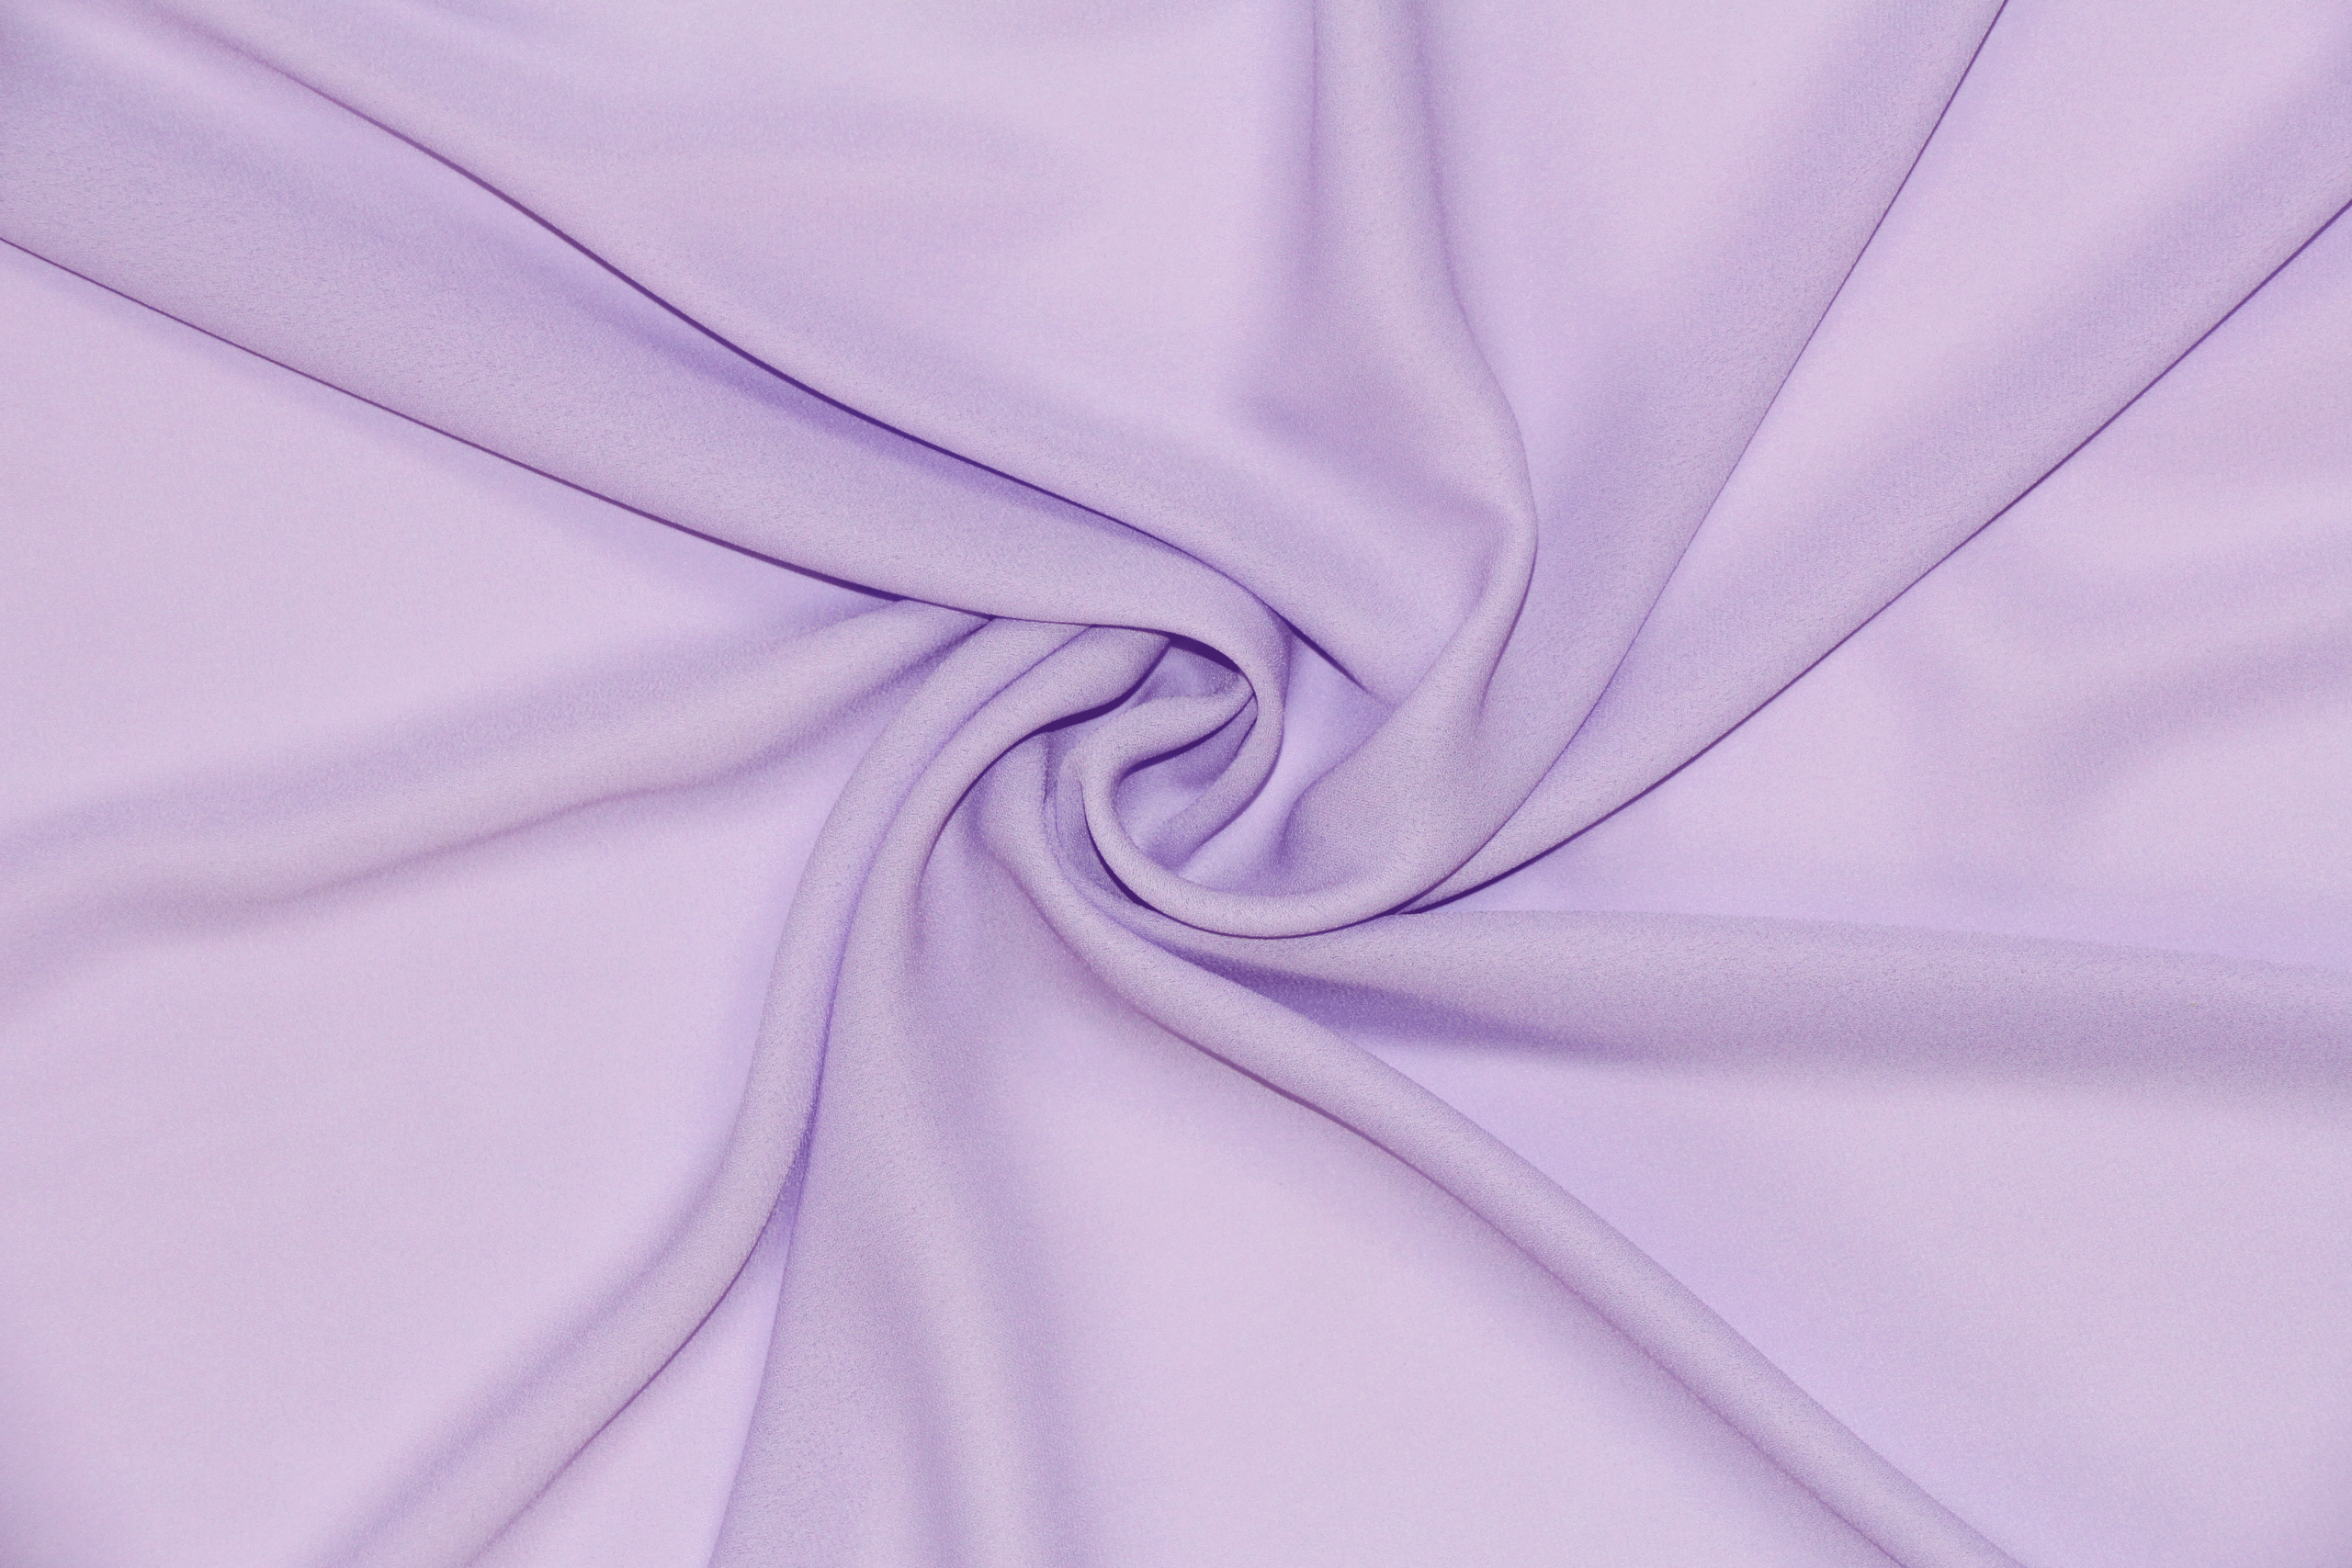 A solid lavender georgette fabric twisted into a spiral.